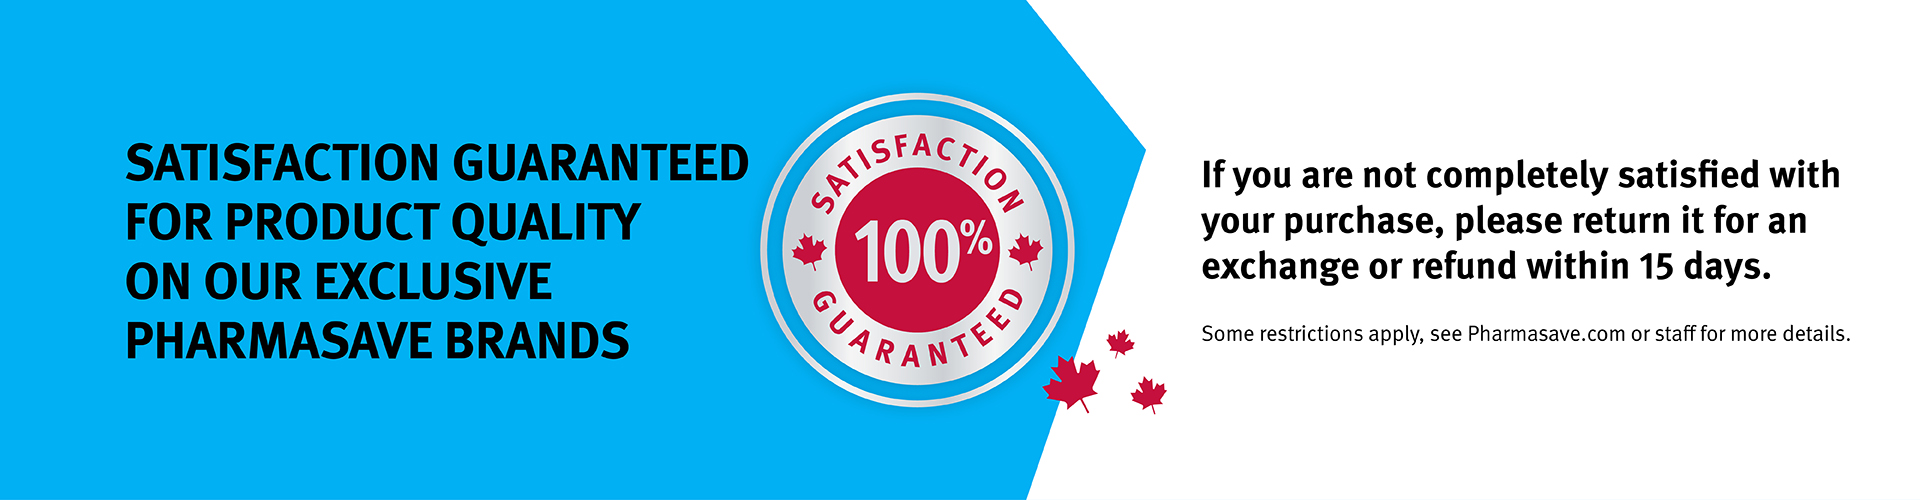 Satisfaction Guaranteed on all exclusive Pharmasave Brand products.